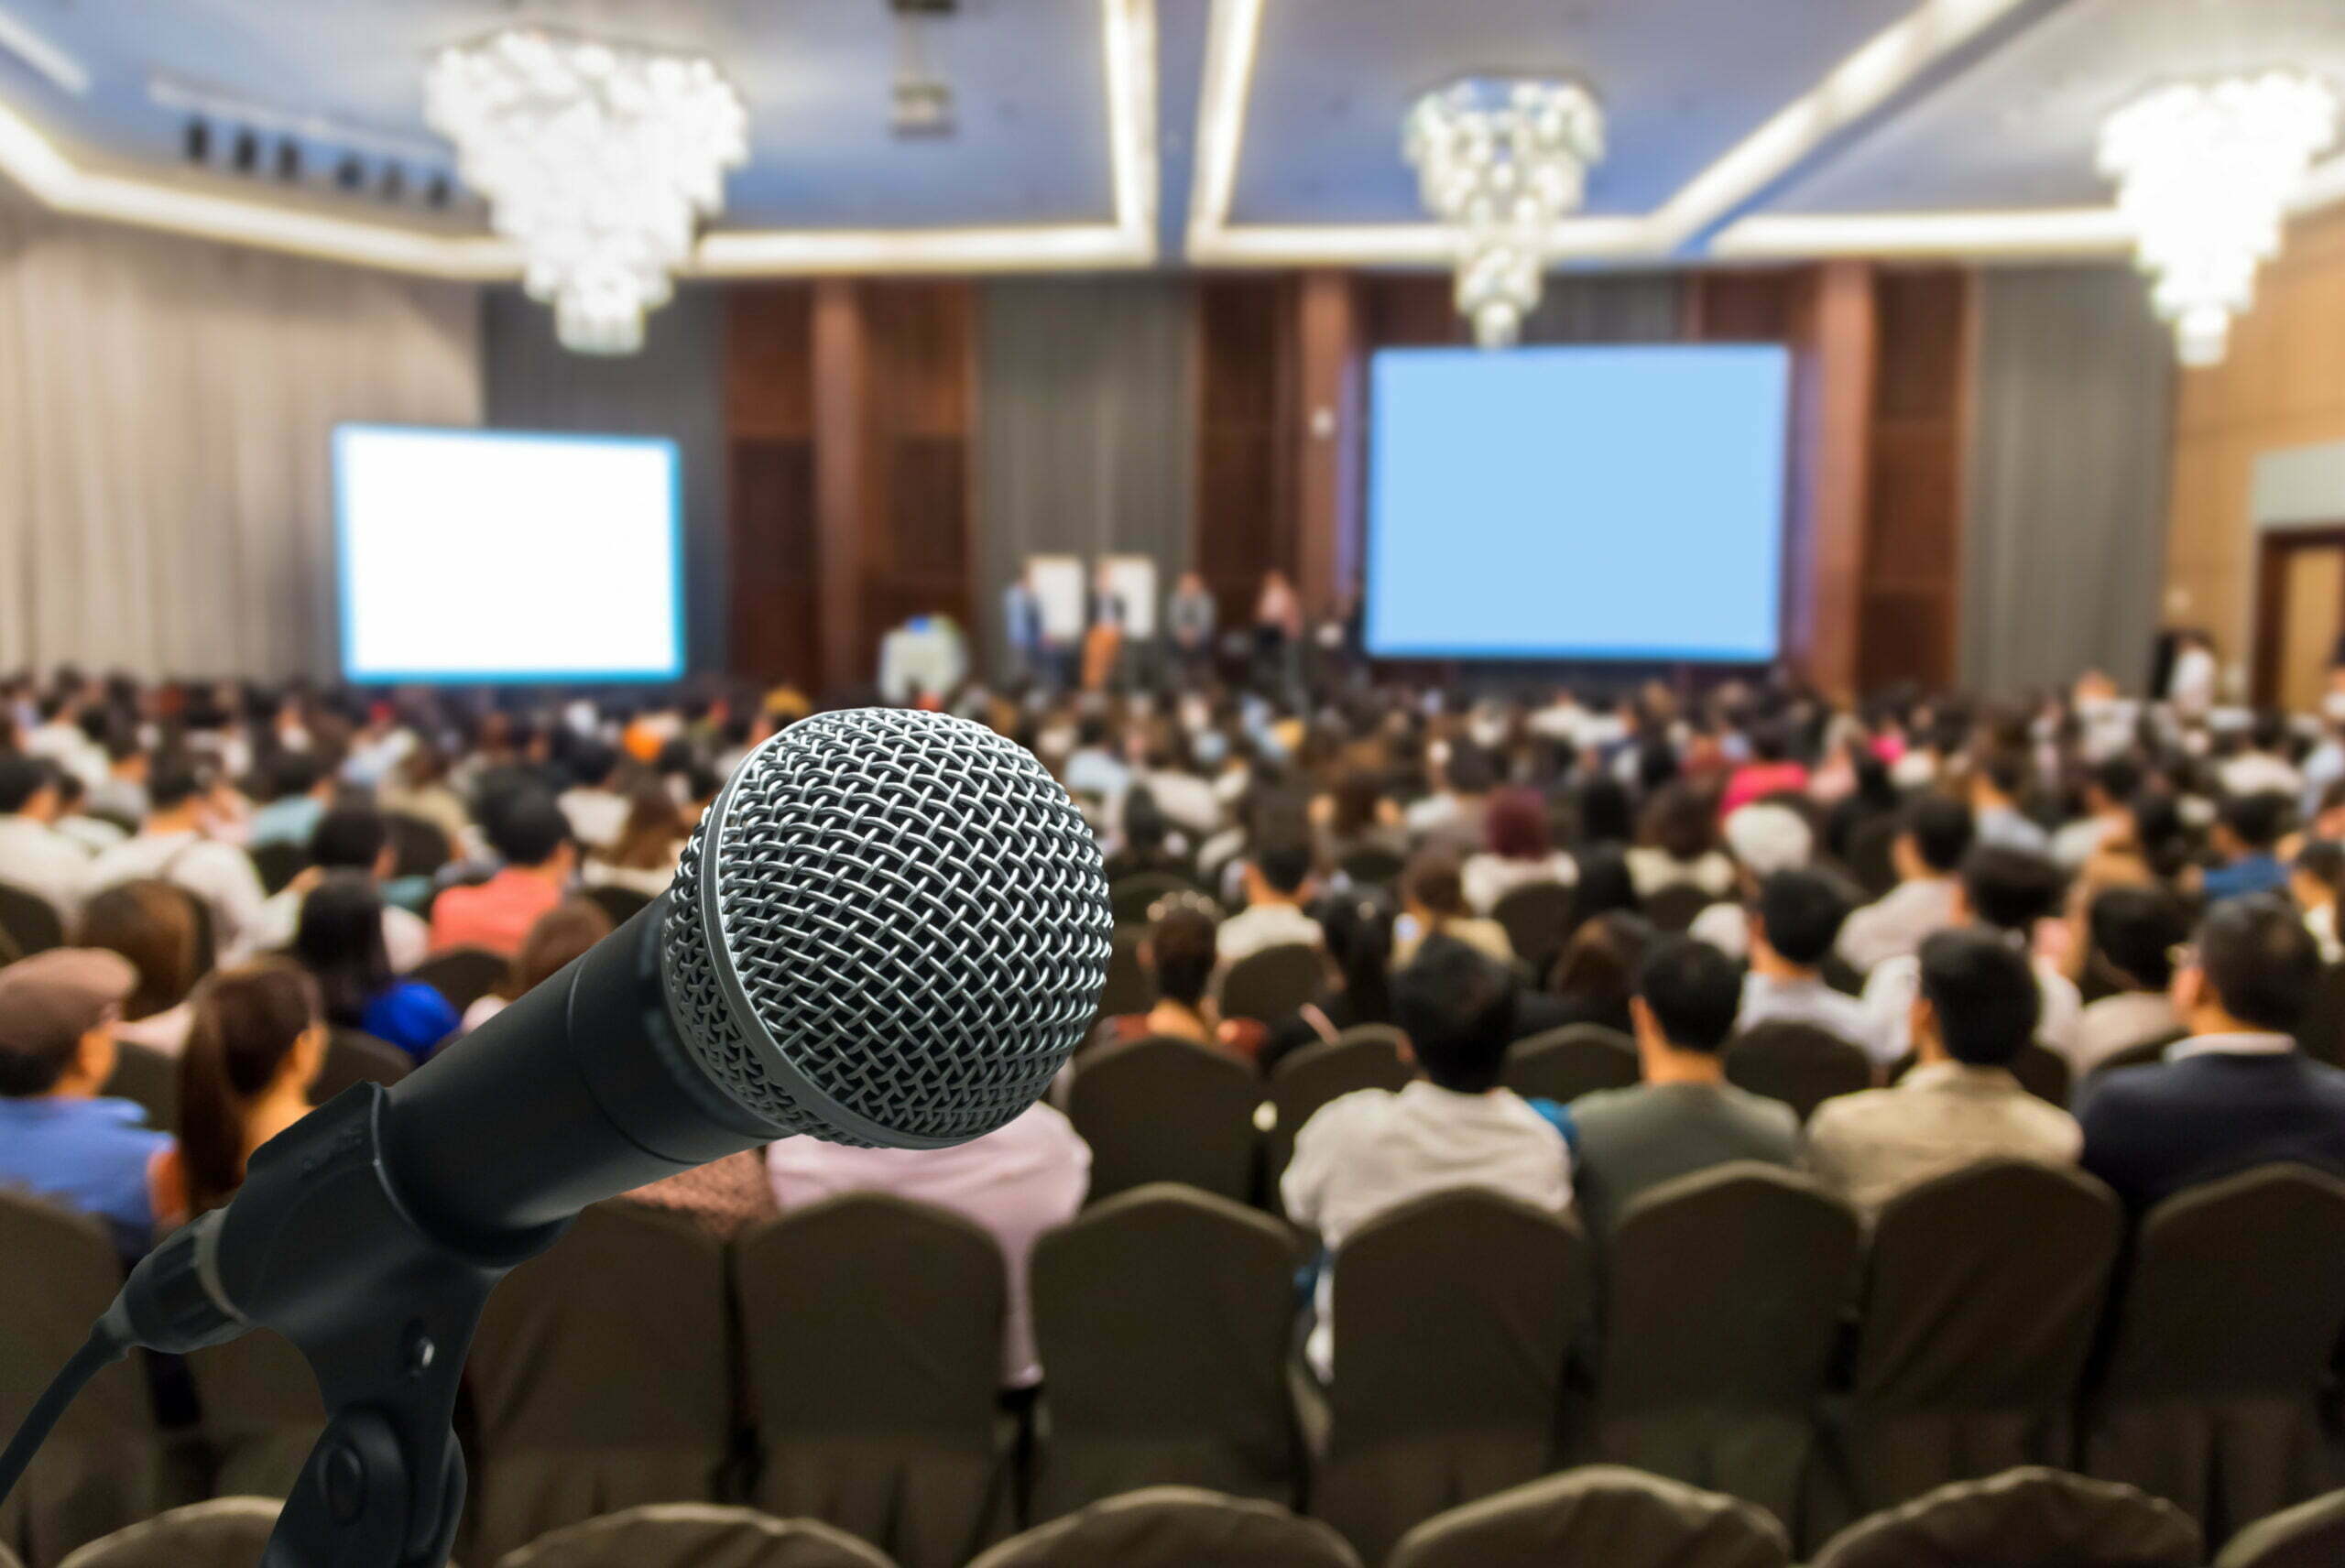 Delivering a speech with power to an audience